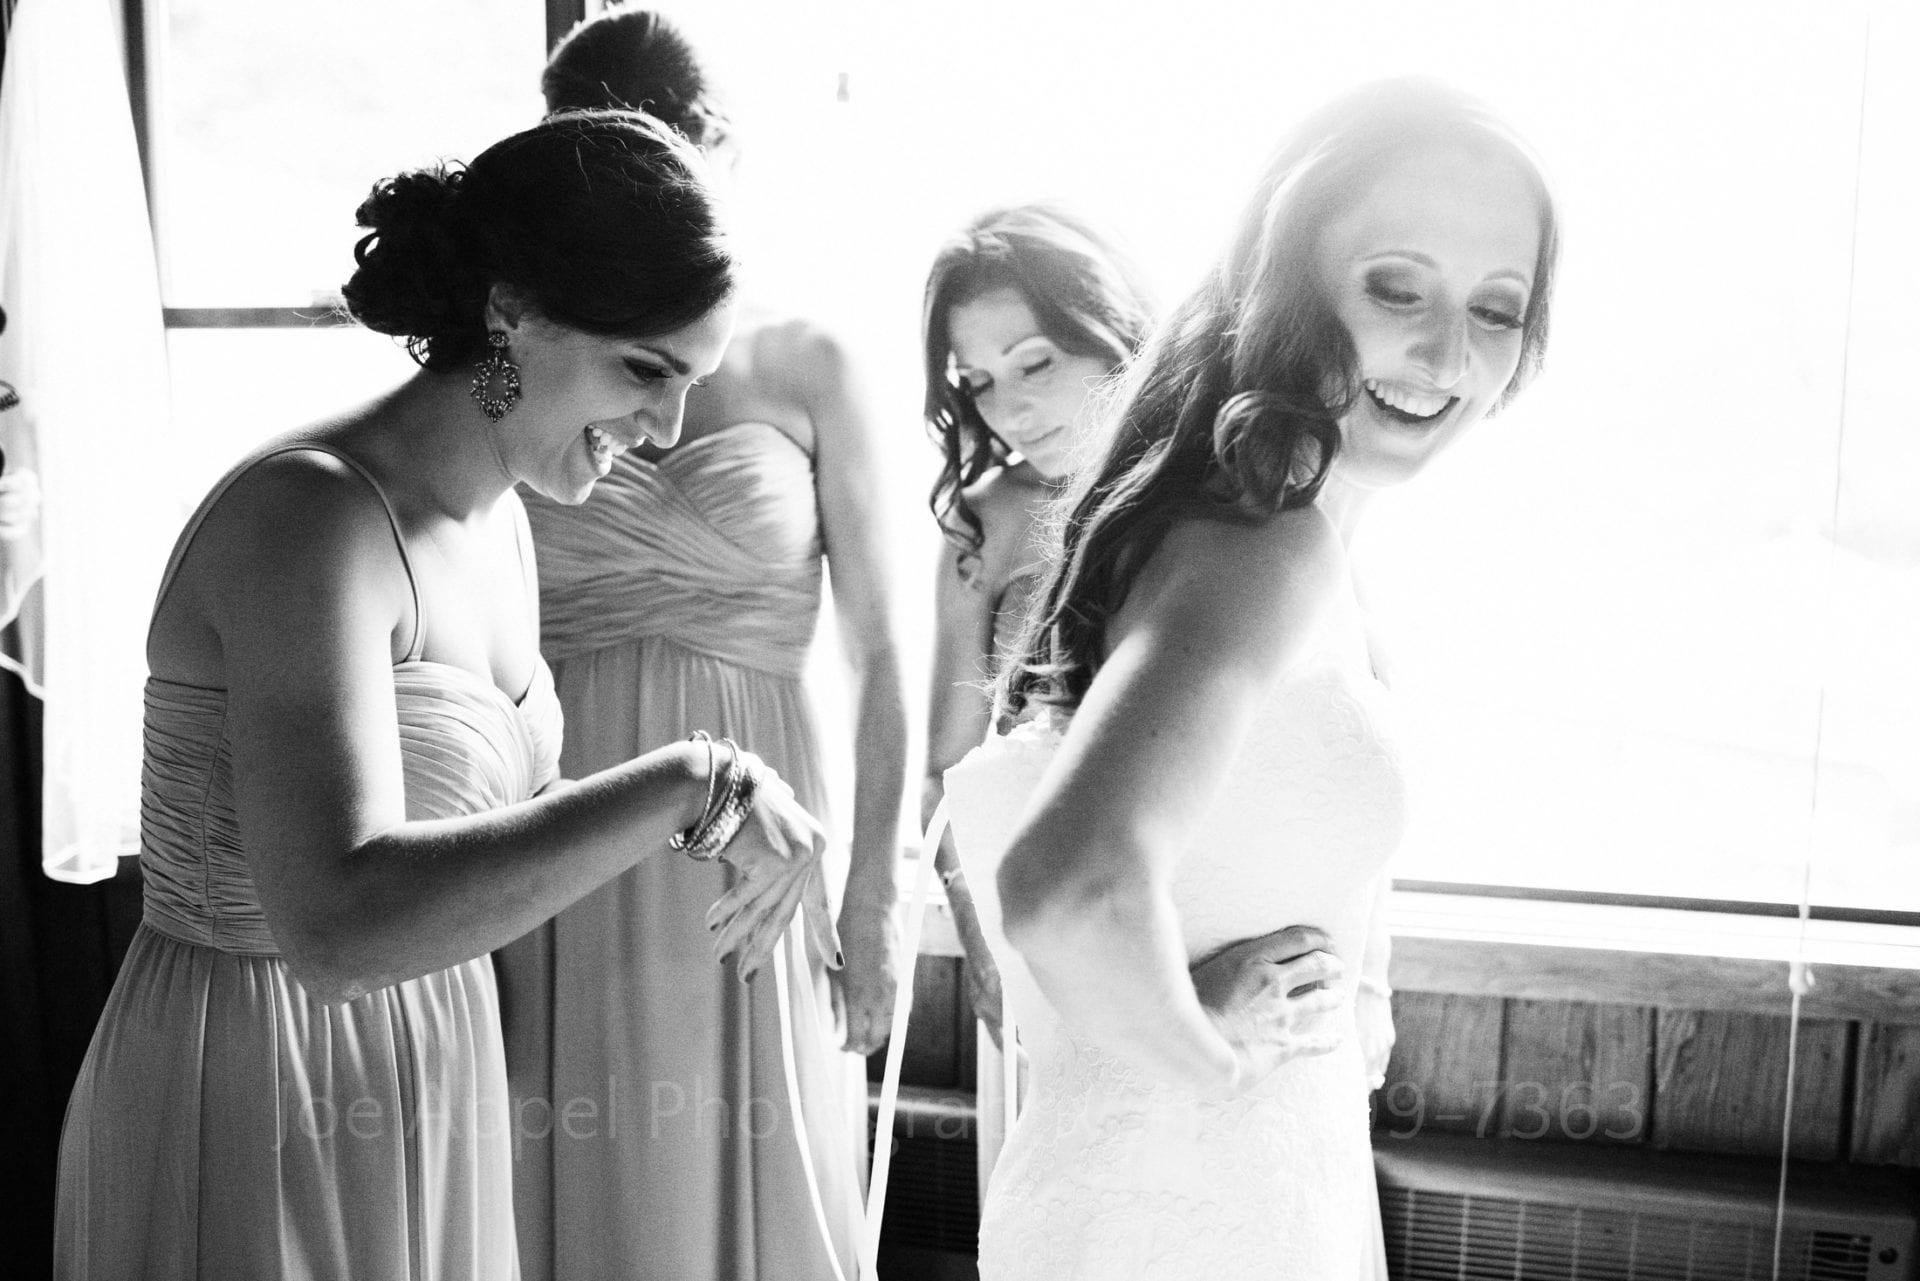 With bright light behind them a bride looks back at her bridesmaids as they tie the laces on the back of her dress.